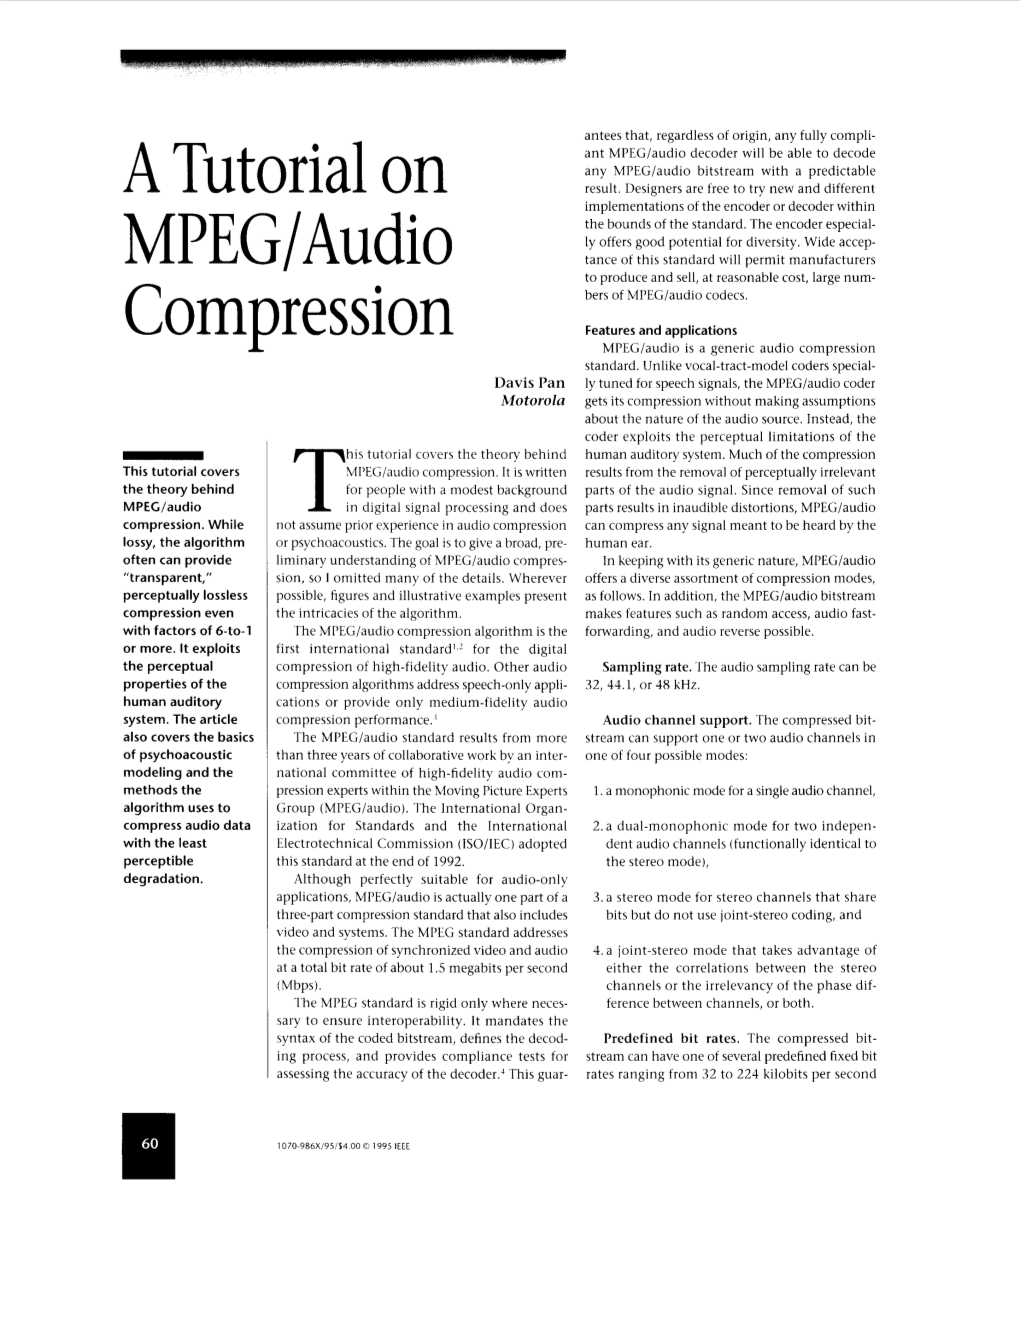 A Tutorial on MPEG/Audio Compression